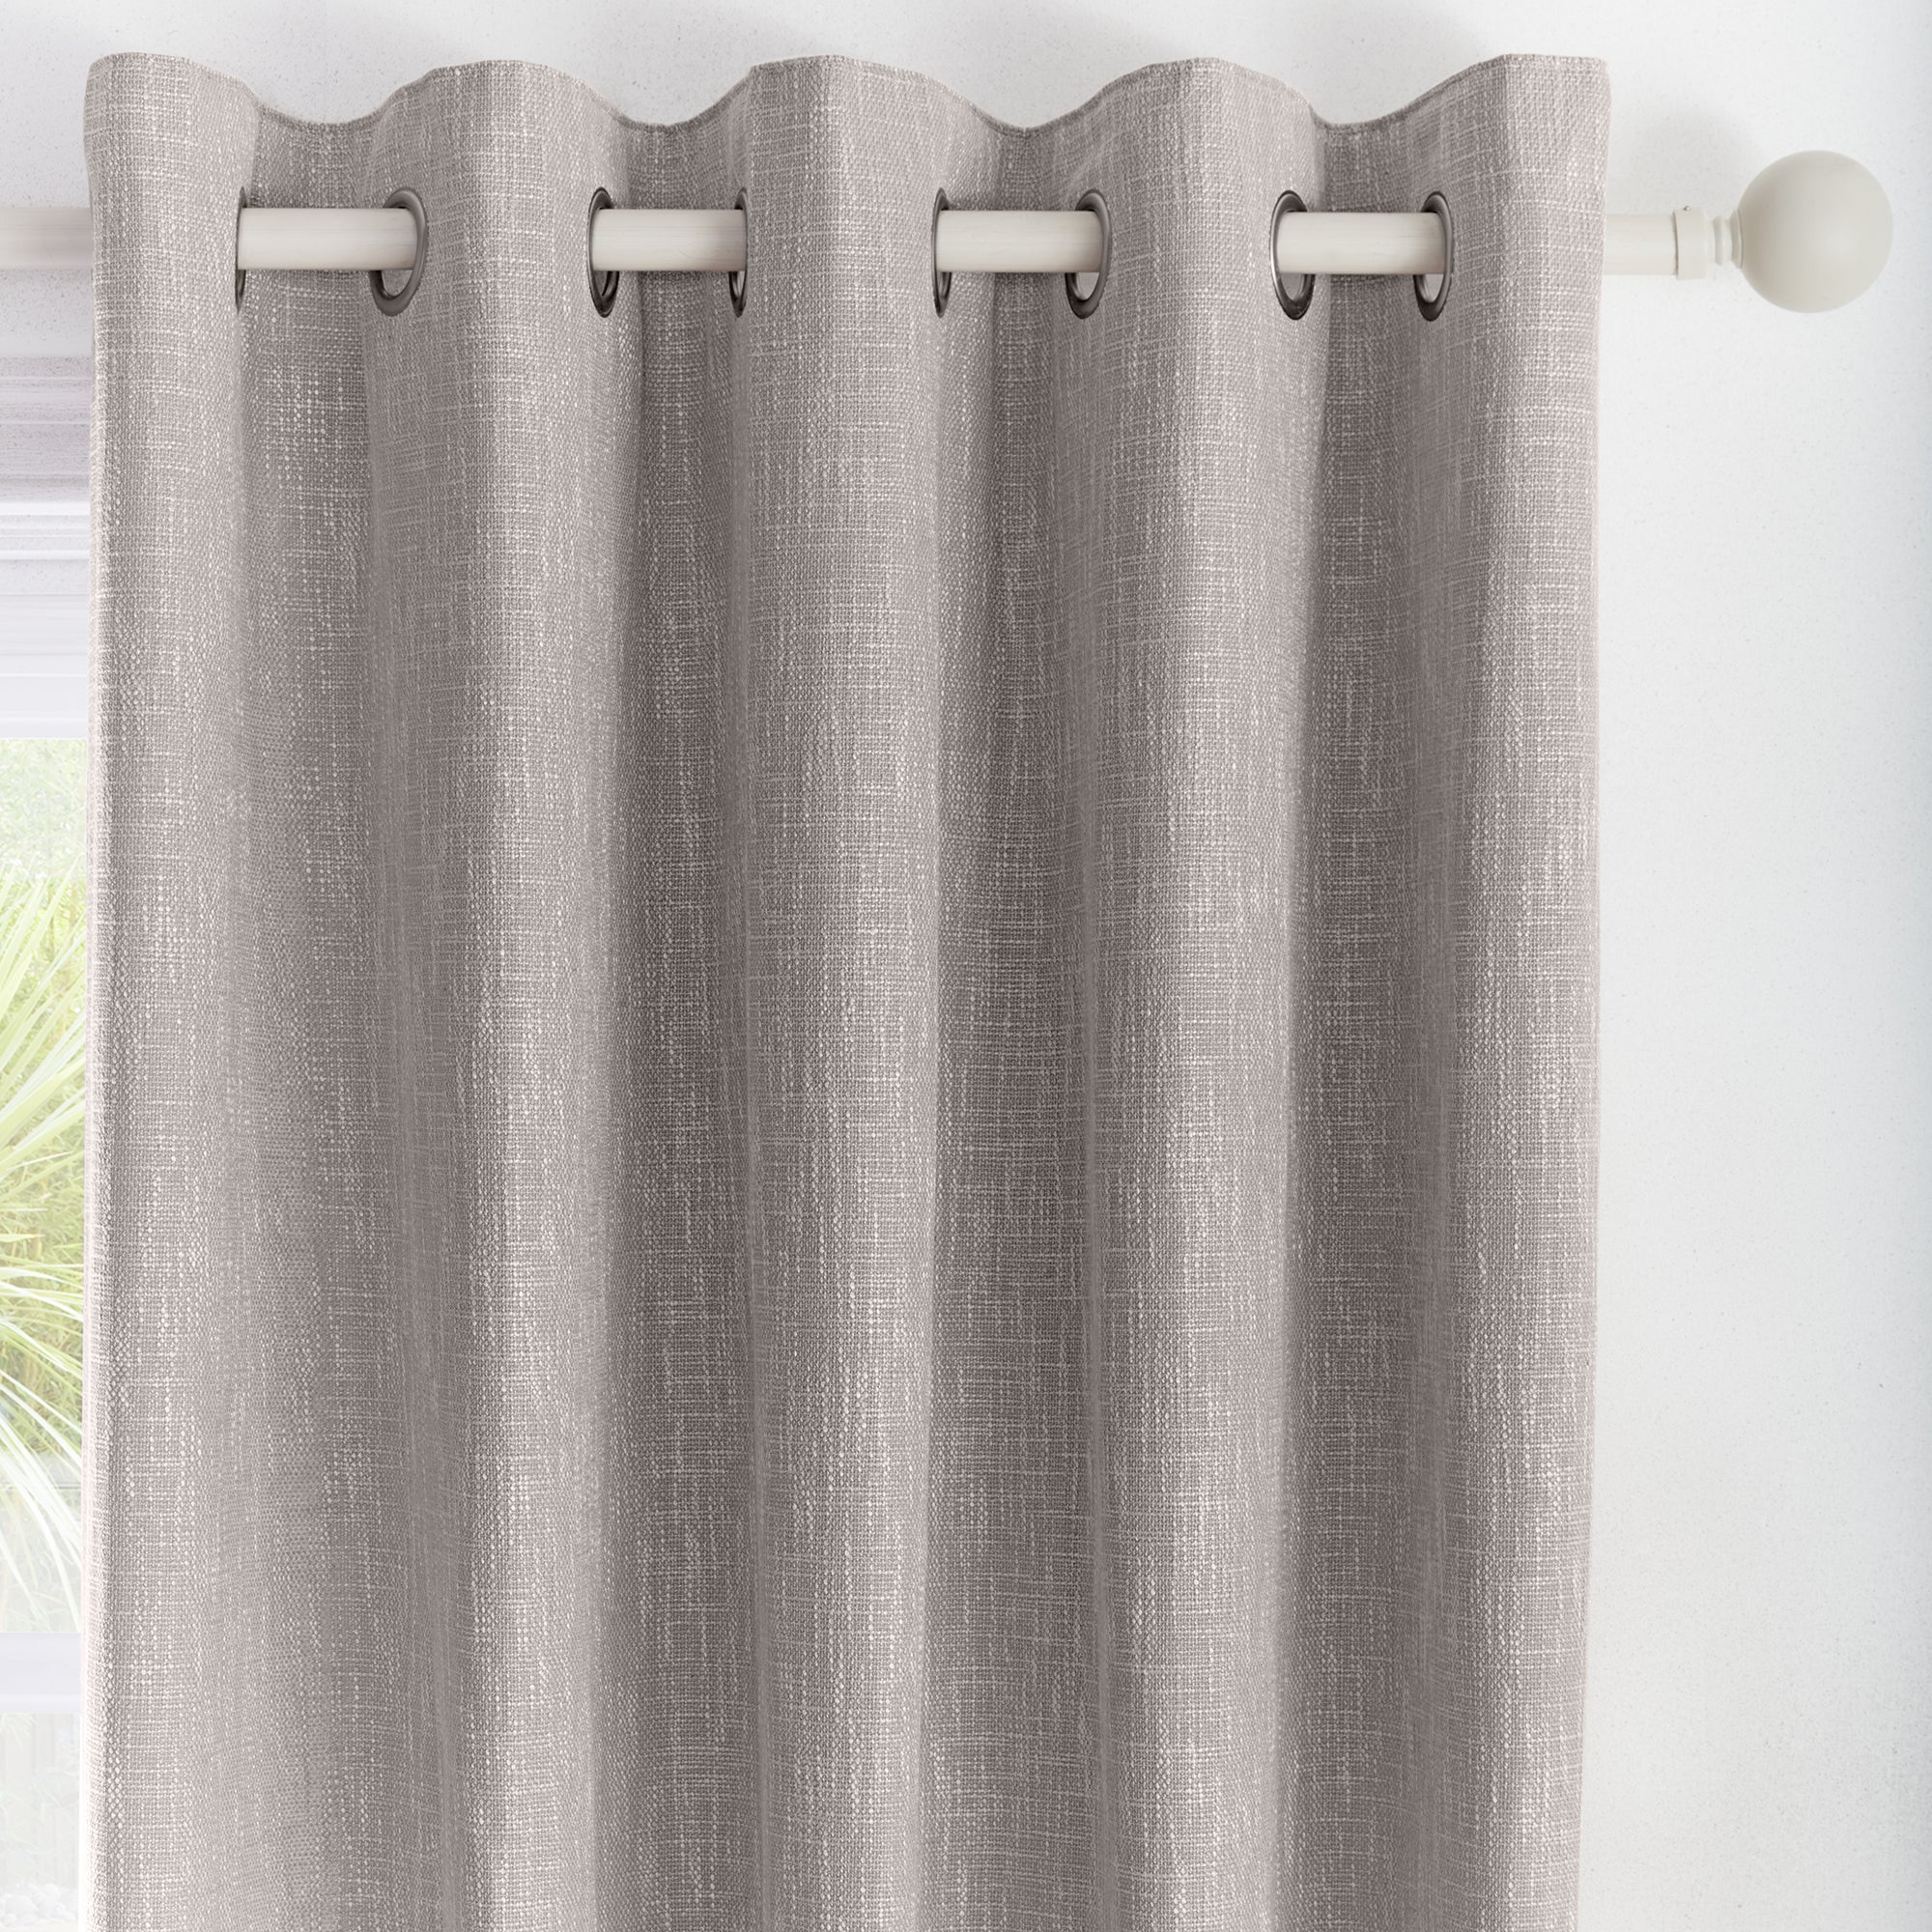 Boucle - Jacquard Pair of Eyelet Curtains in Grey - By Appletree Loft